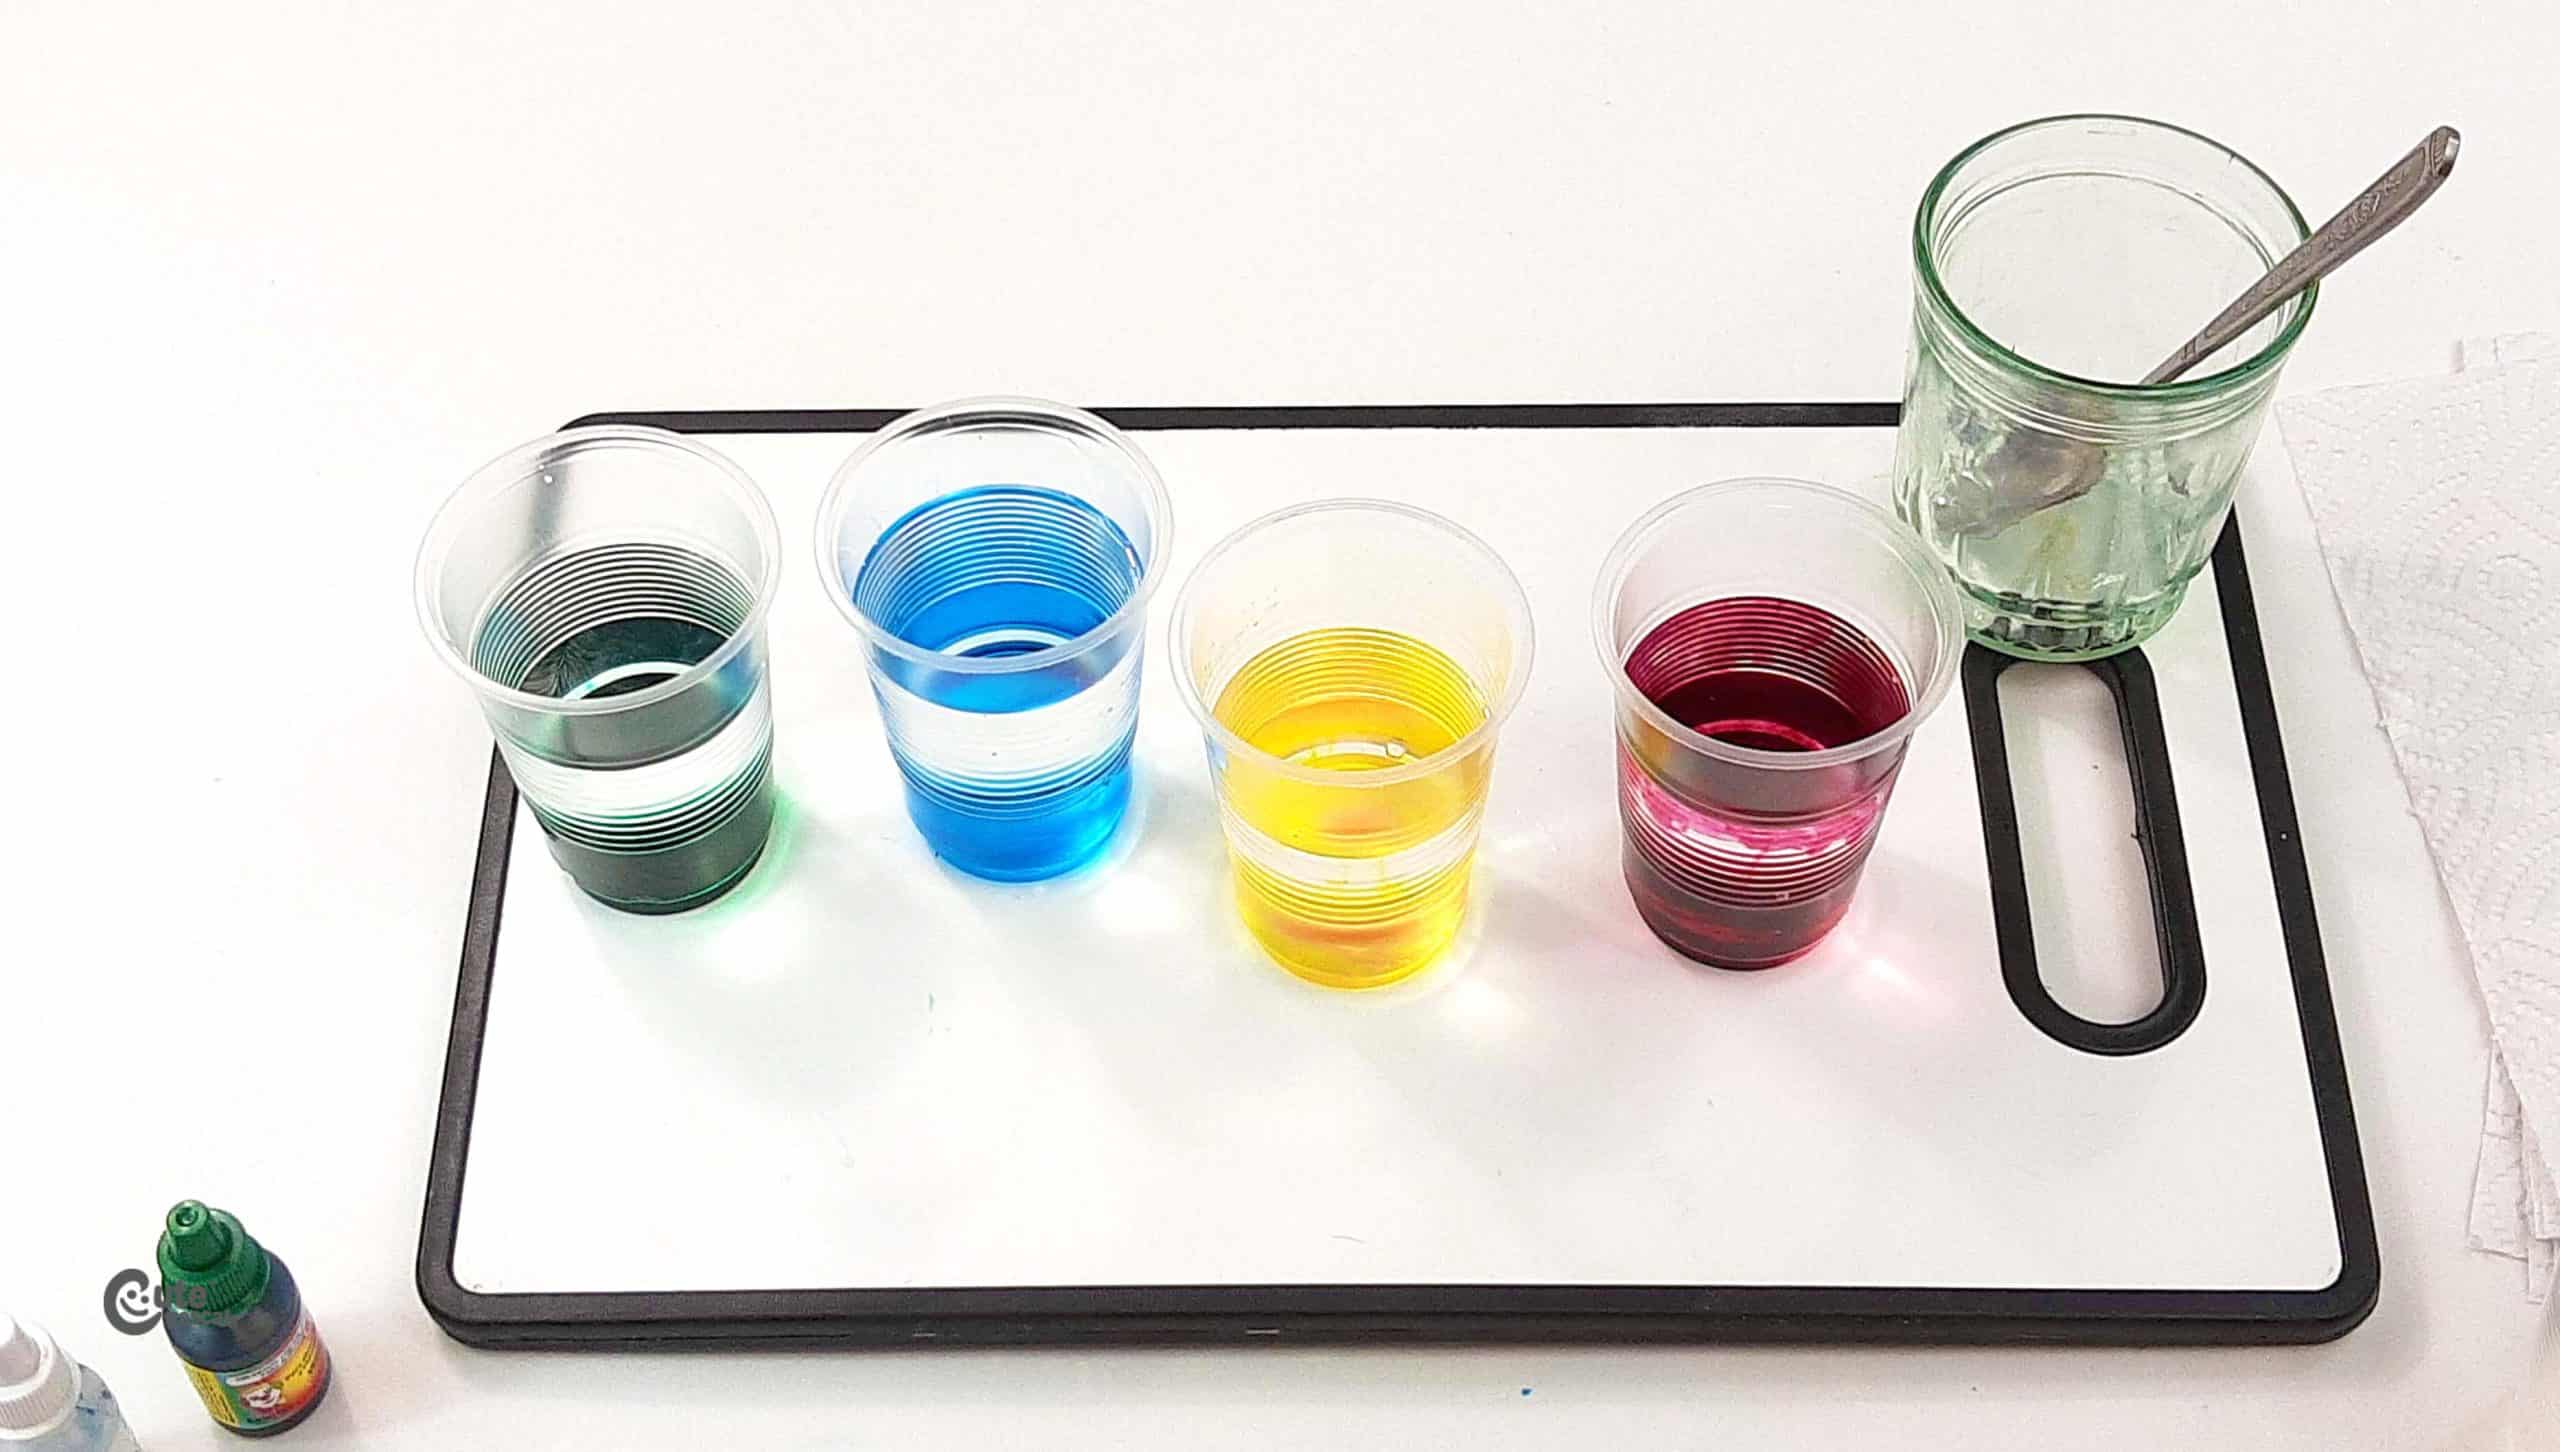 Add food coloring to the Easter science experiments